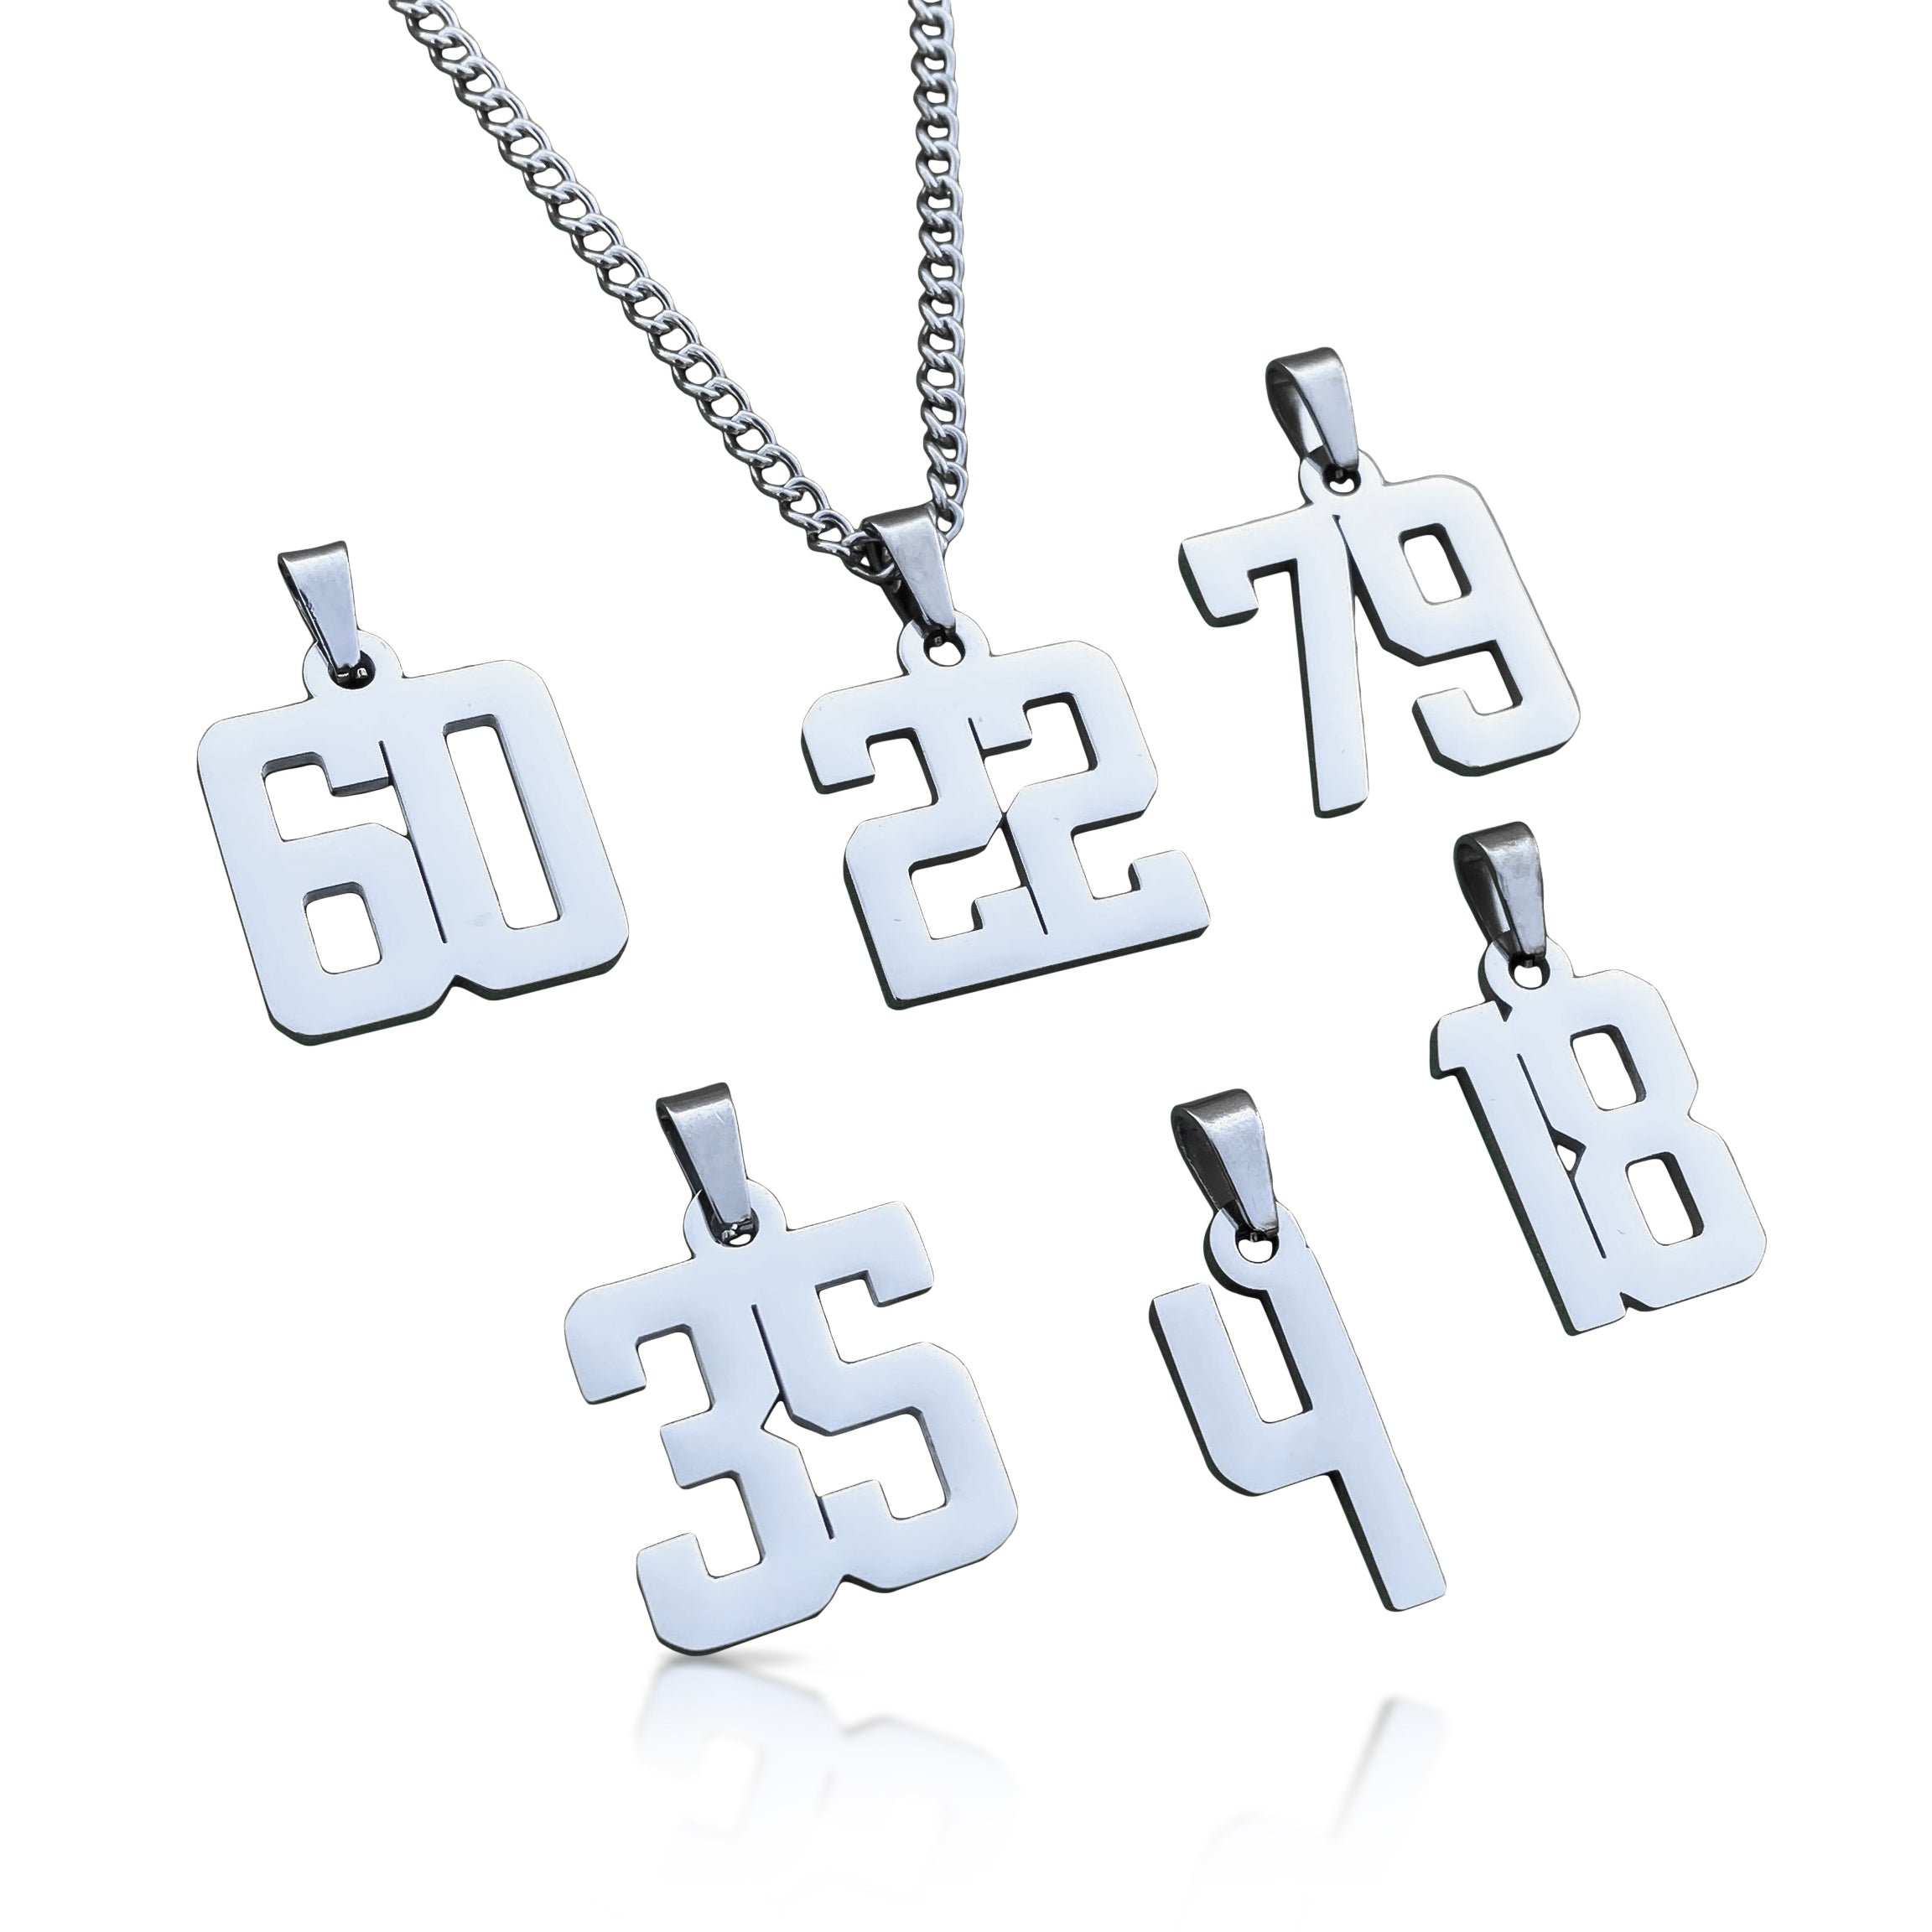 Custom Number Pendant with Chain Necklace - Stainless Steel - Waterproof & Tarnish Resistant | Elite Athletic Gear